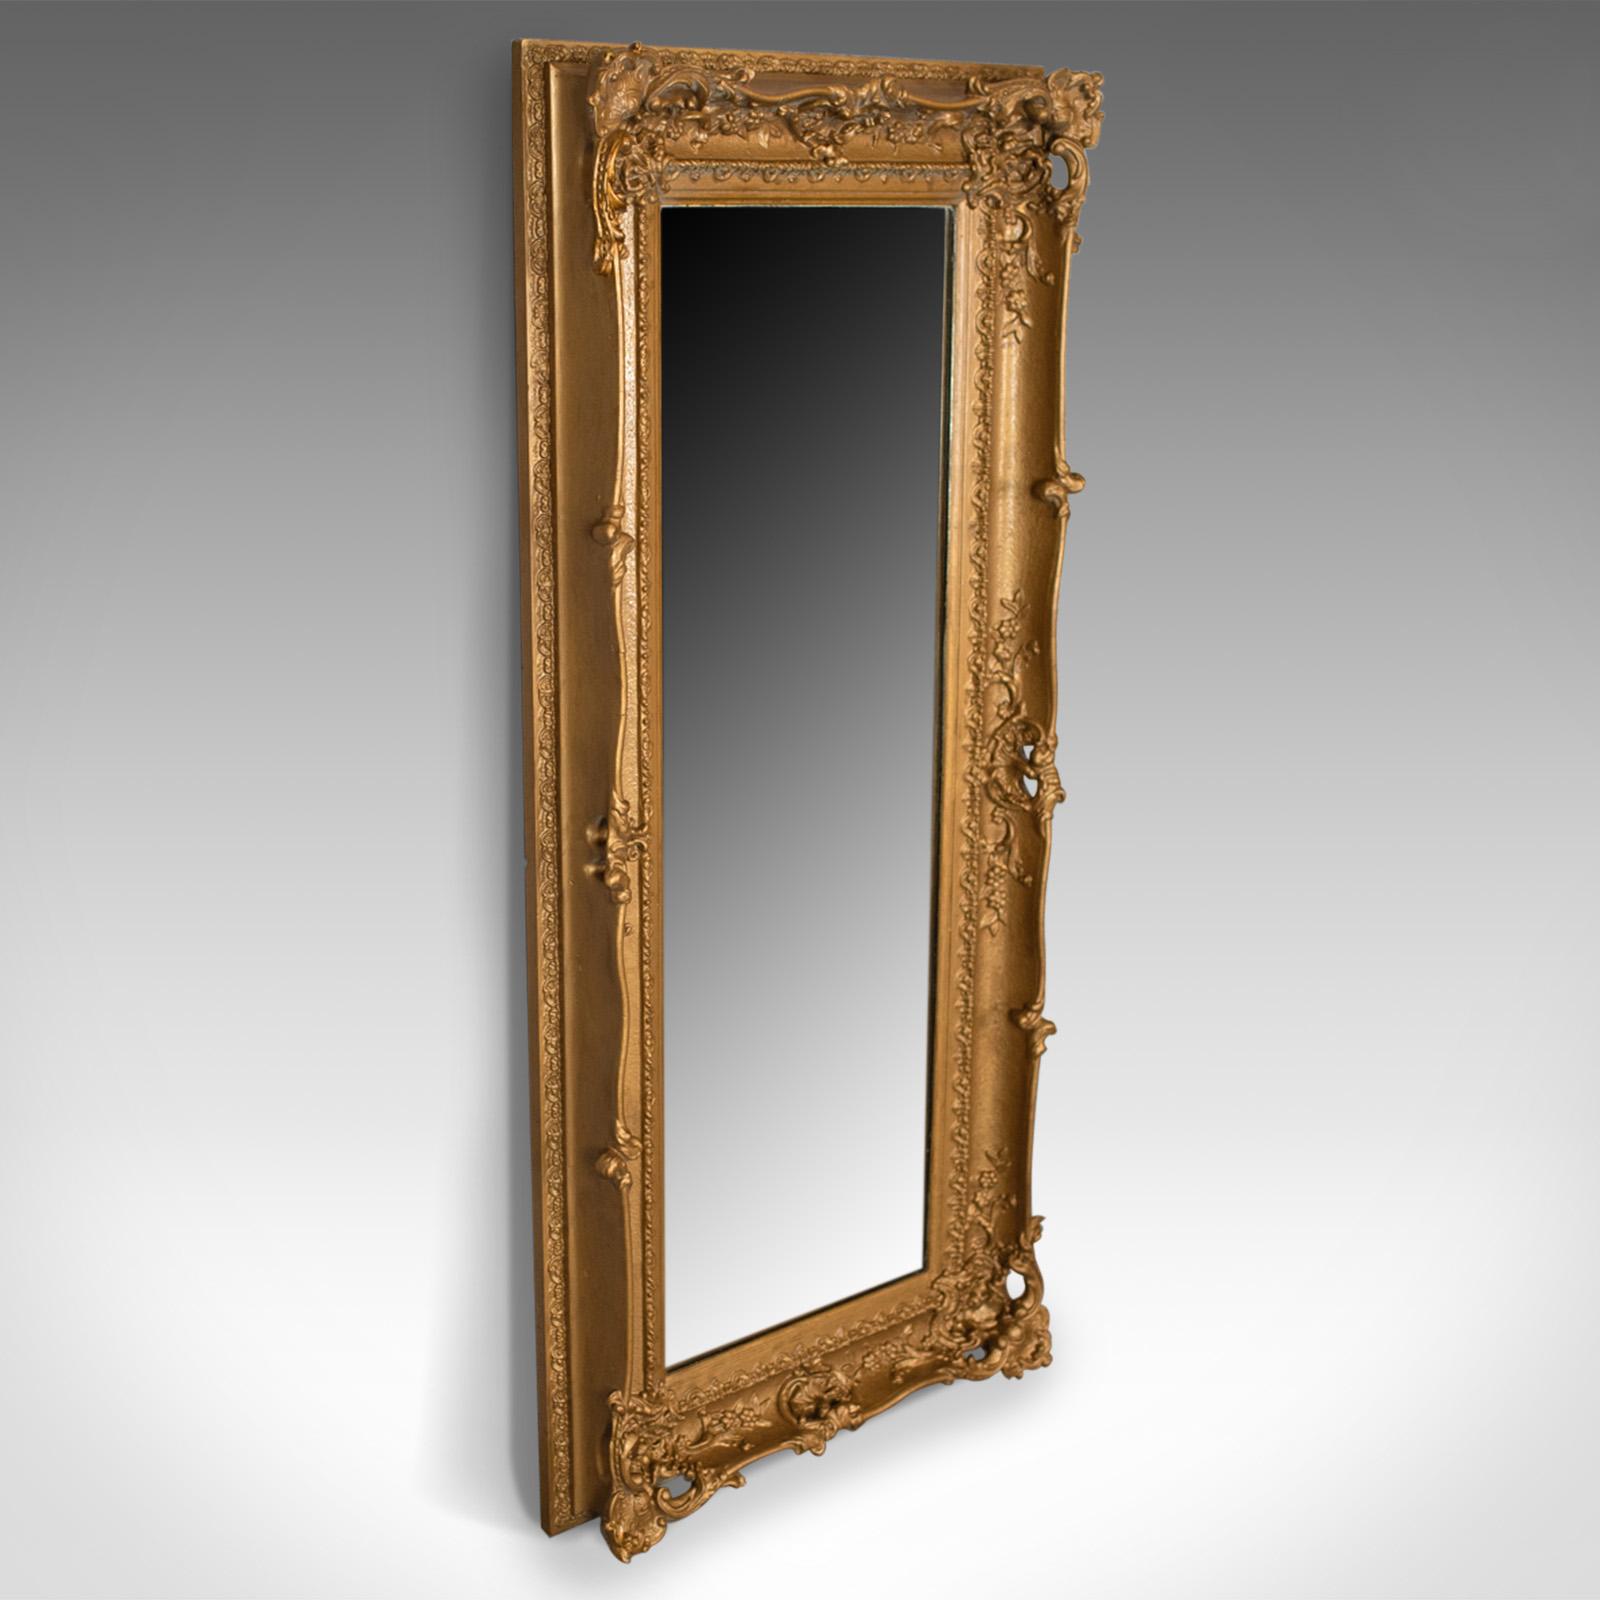 This is a large antique mirror, a tall, English, Victorian, gilt gesso dressing mirror dating to the mid-19th century, circa 1850.

A super period gilt gesso frame
Victorian in the classical taste
Decorated with scrolls, foliate detail and